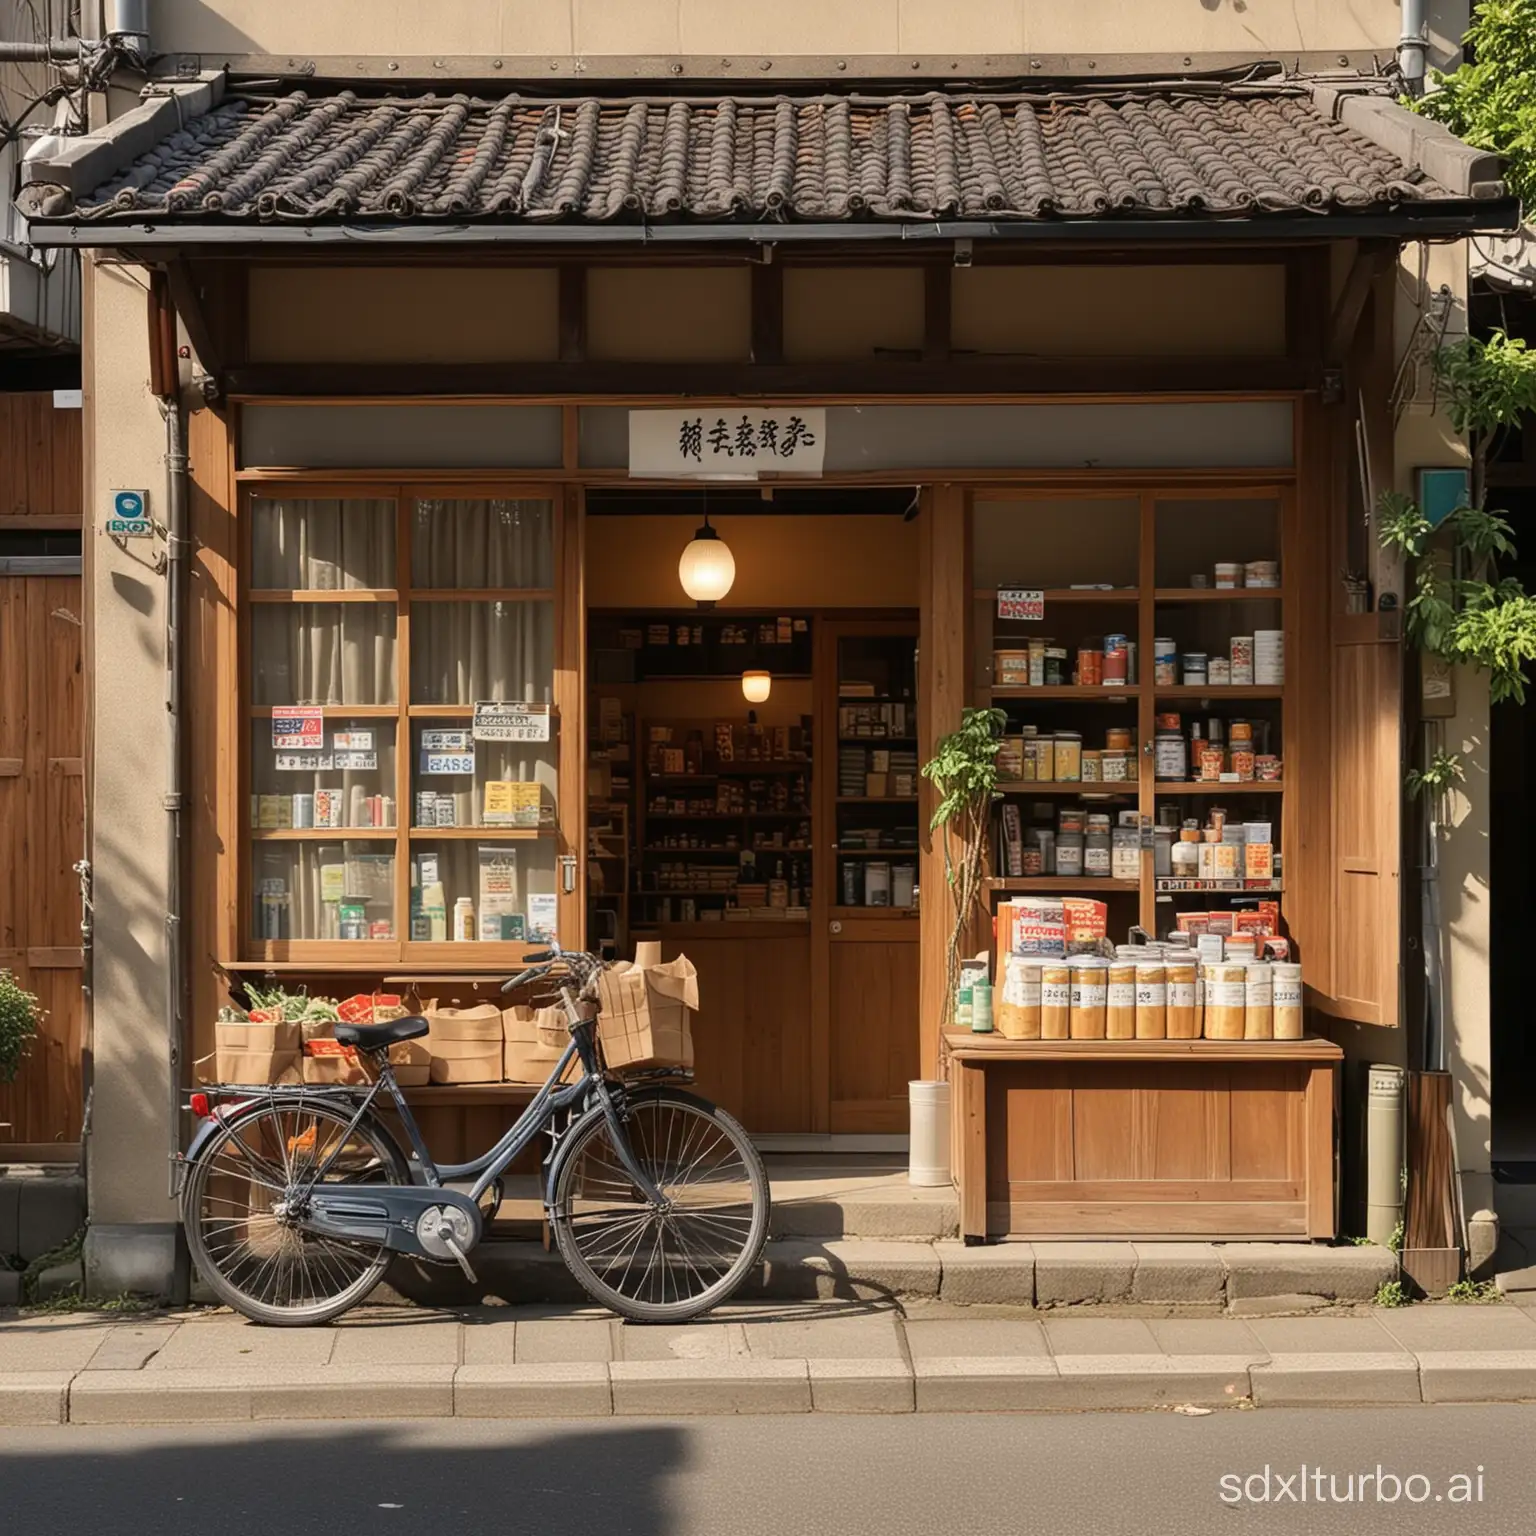 A small traditional wooden grocery store from the 1960s in Japan, viewed from the outside looking in, with the interior appearing cluttered. The surroundings of the grocery store are shaded by trees. The store's exterior features wooden walls and a simple, traditional Japanese design. Through the window, various shelves and counters can be seen inside, stocked with an assortment of goods such as canned foods, rice bags, and household items. The interior is dimly lit with warm light filtering through the windows. Outside the store, a bicycle is parked against the wall, adding to the quaint atmosphere. The scene captures the nostalgic charm of a vintage Japanese neighborhood grocery store.